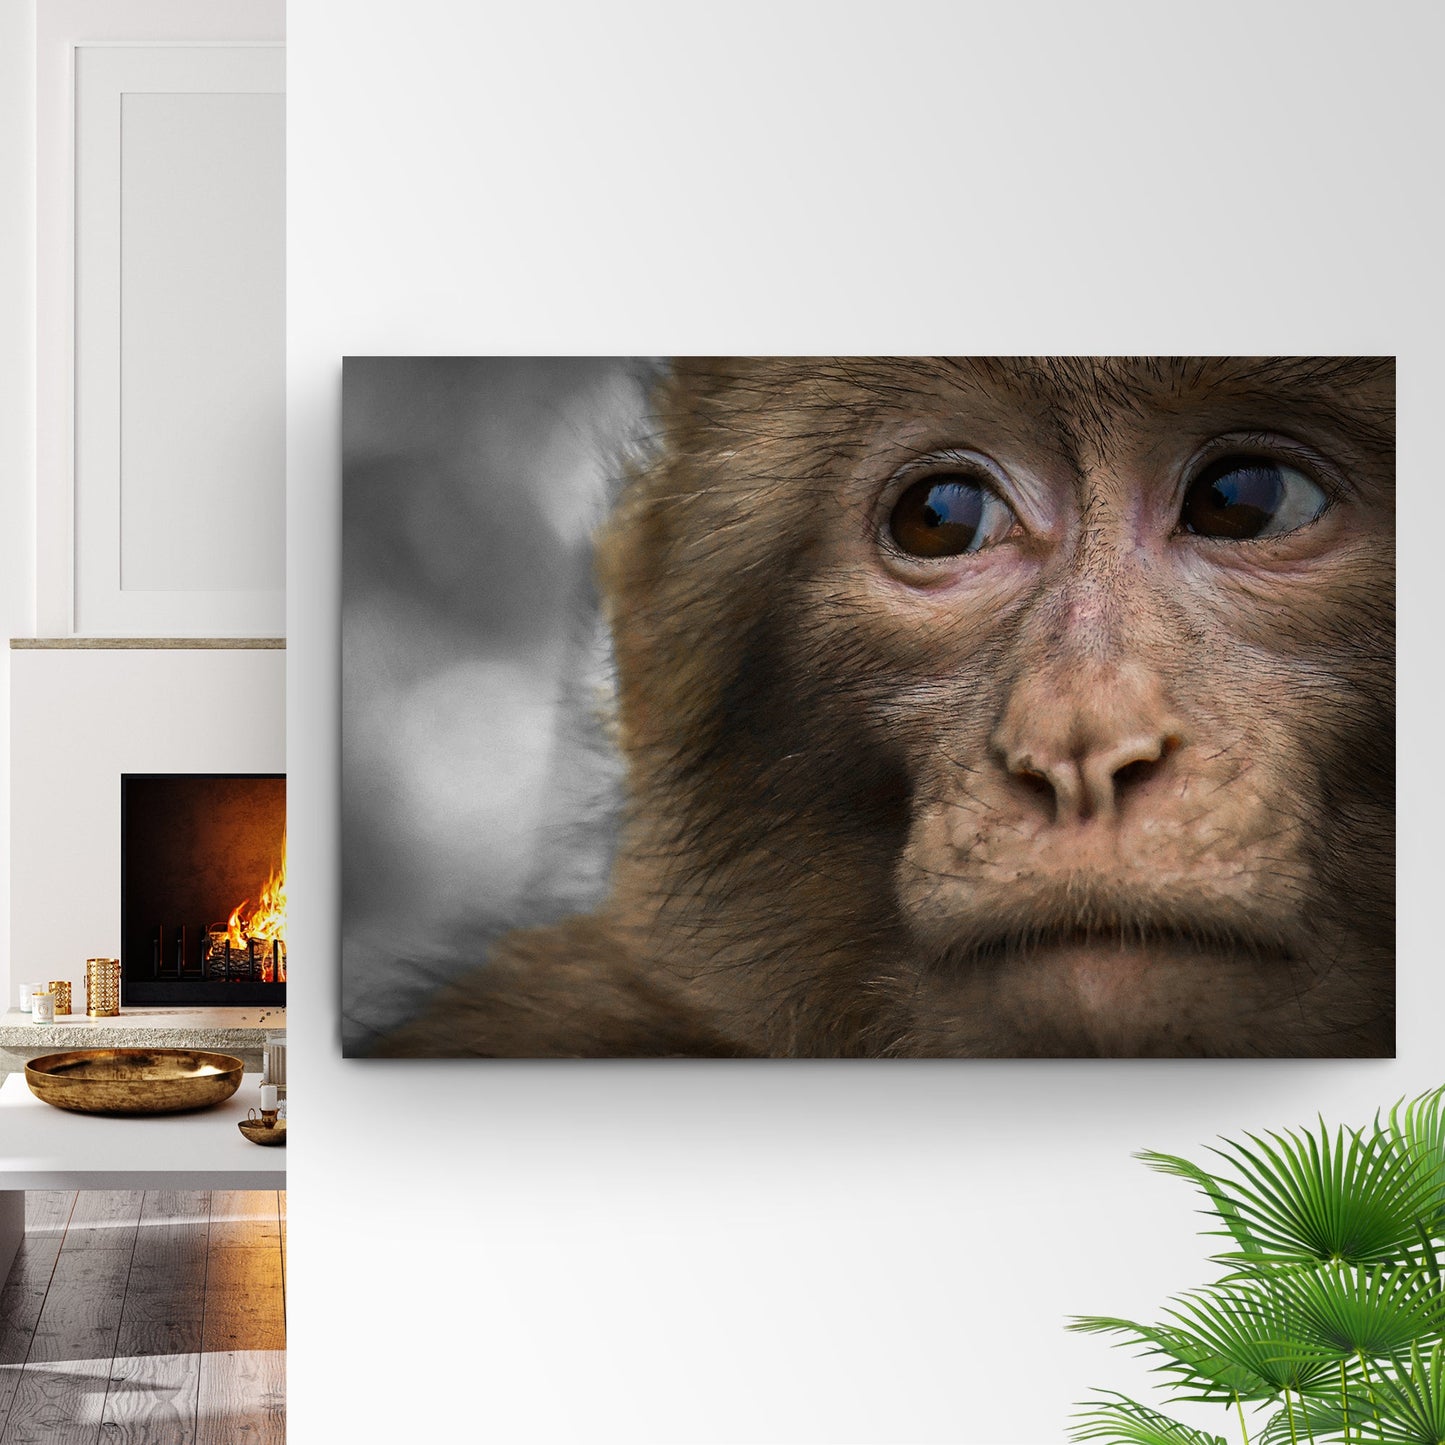 Monkey Portrait Canvas Wall Art with Character